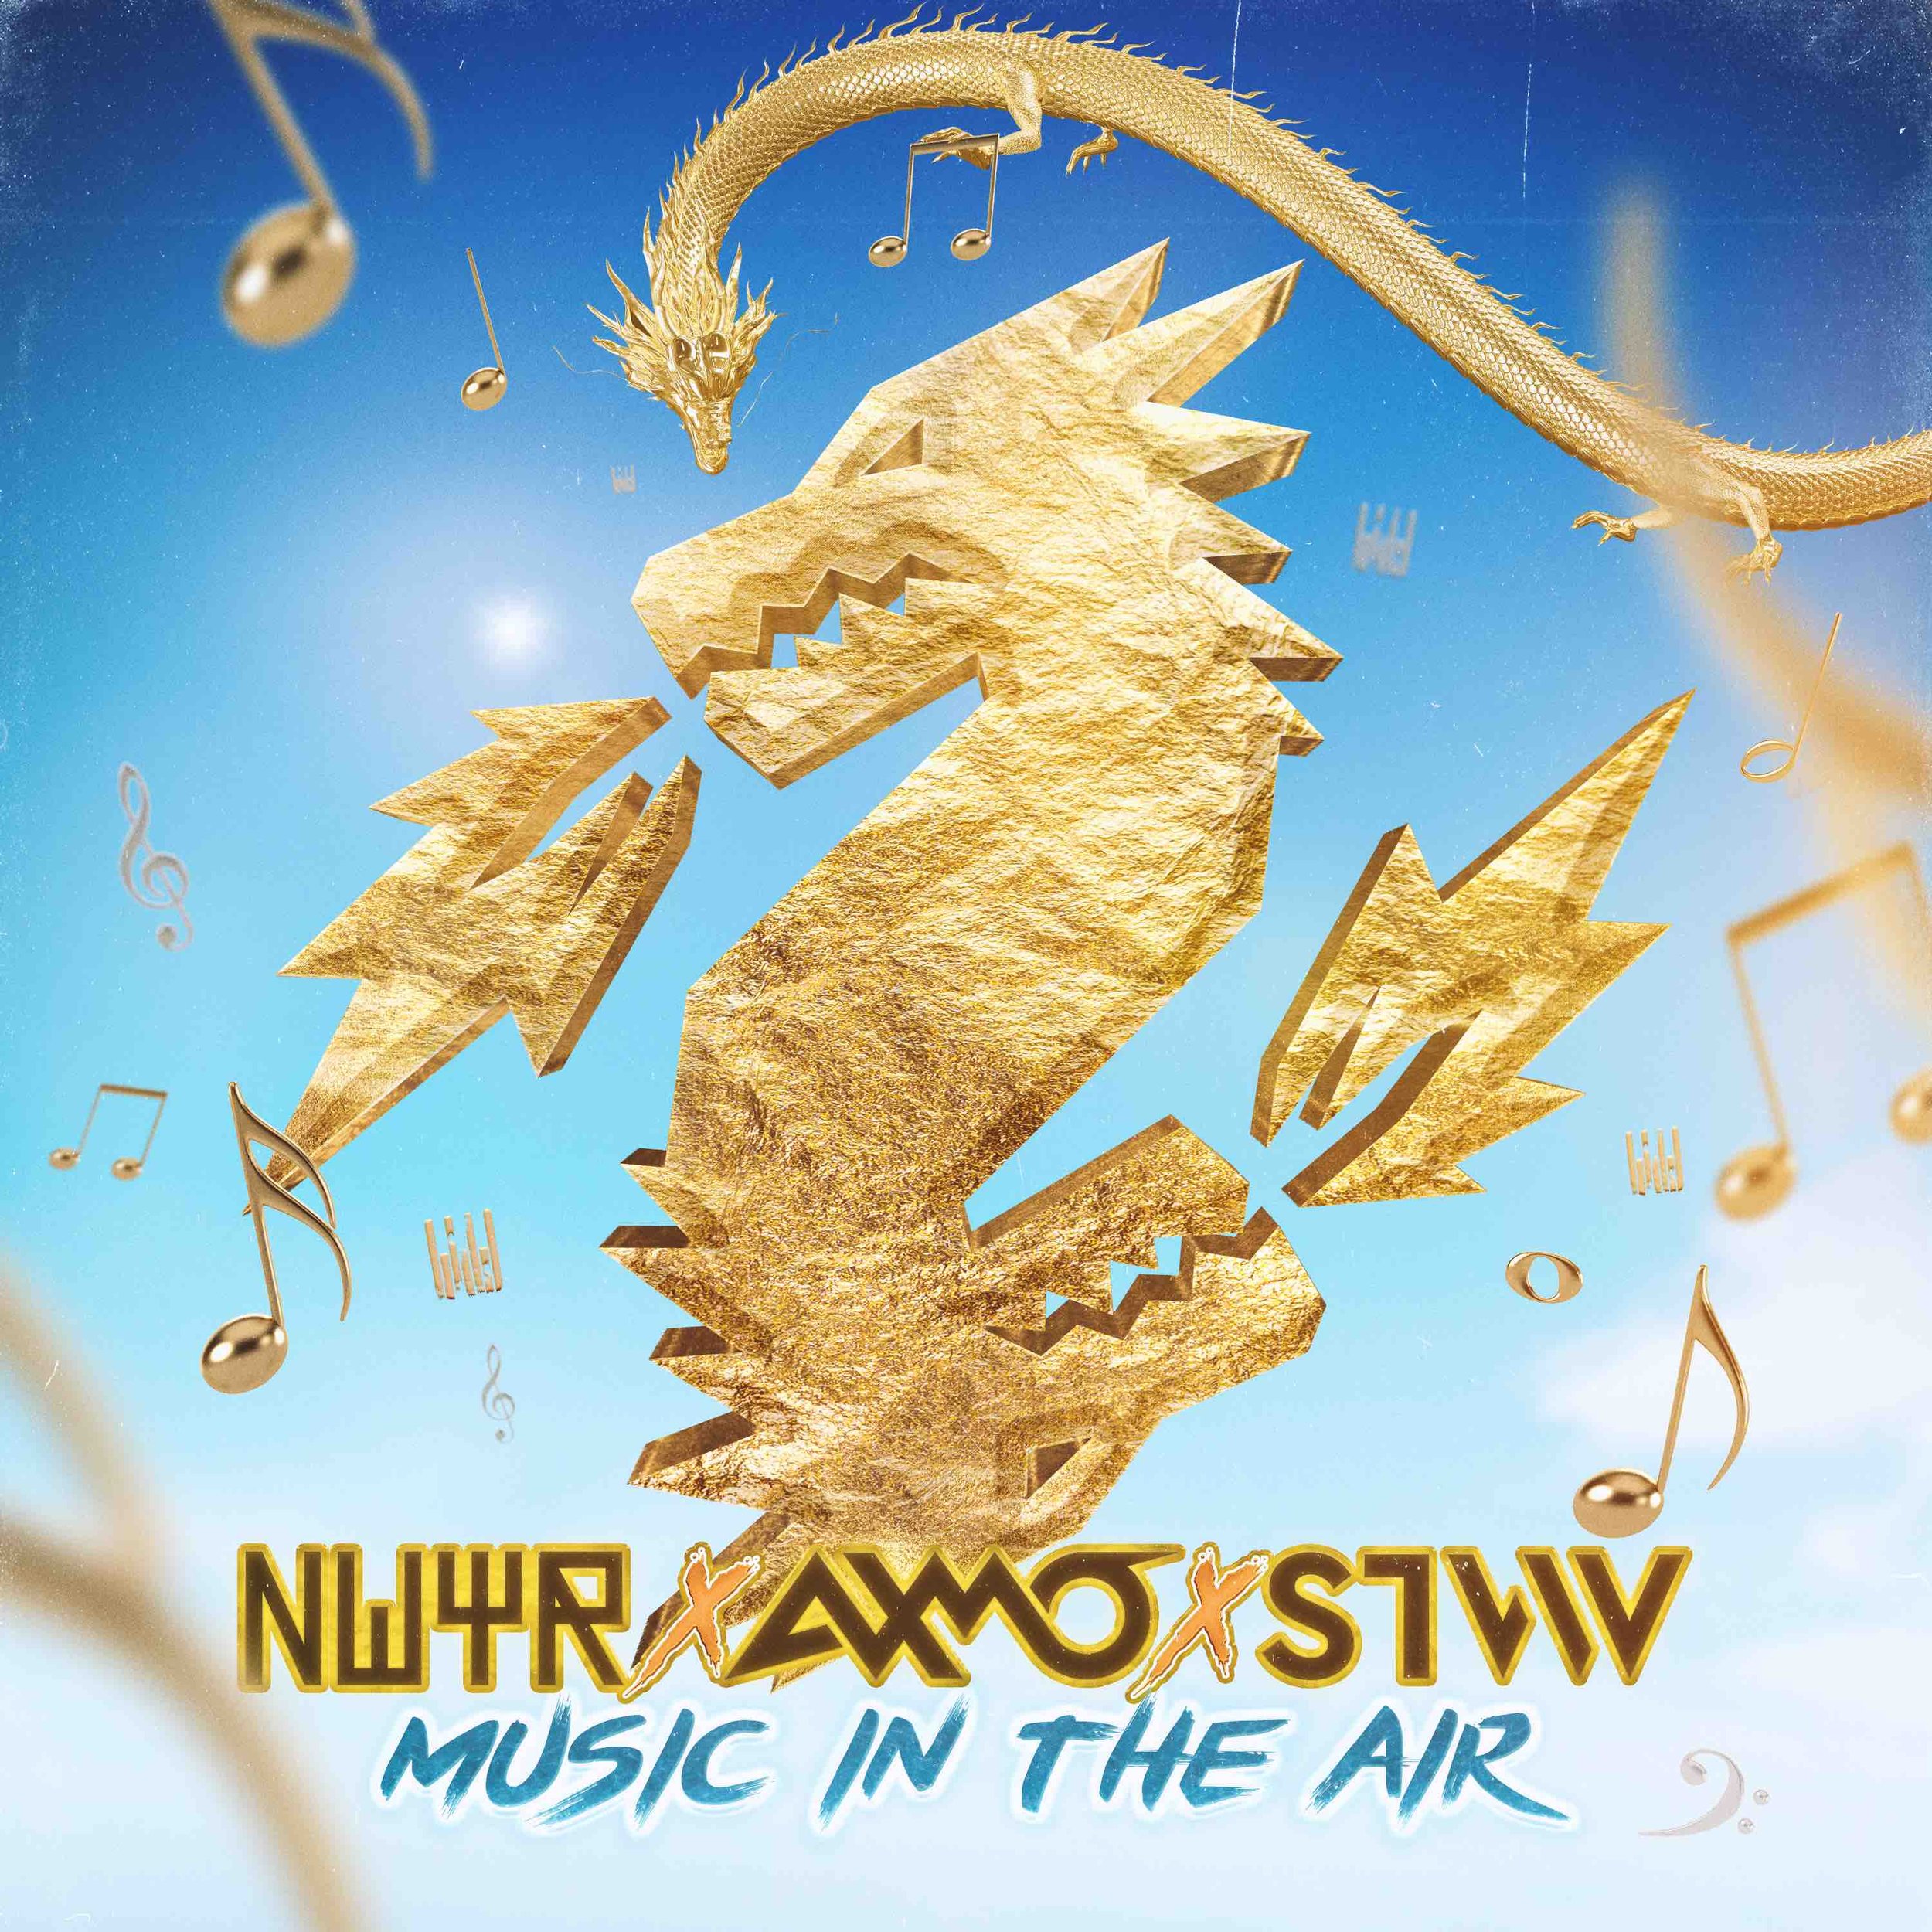 NWYR x AXMO x STVW - Music In The Air Official Artwork.